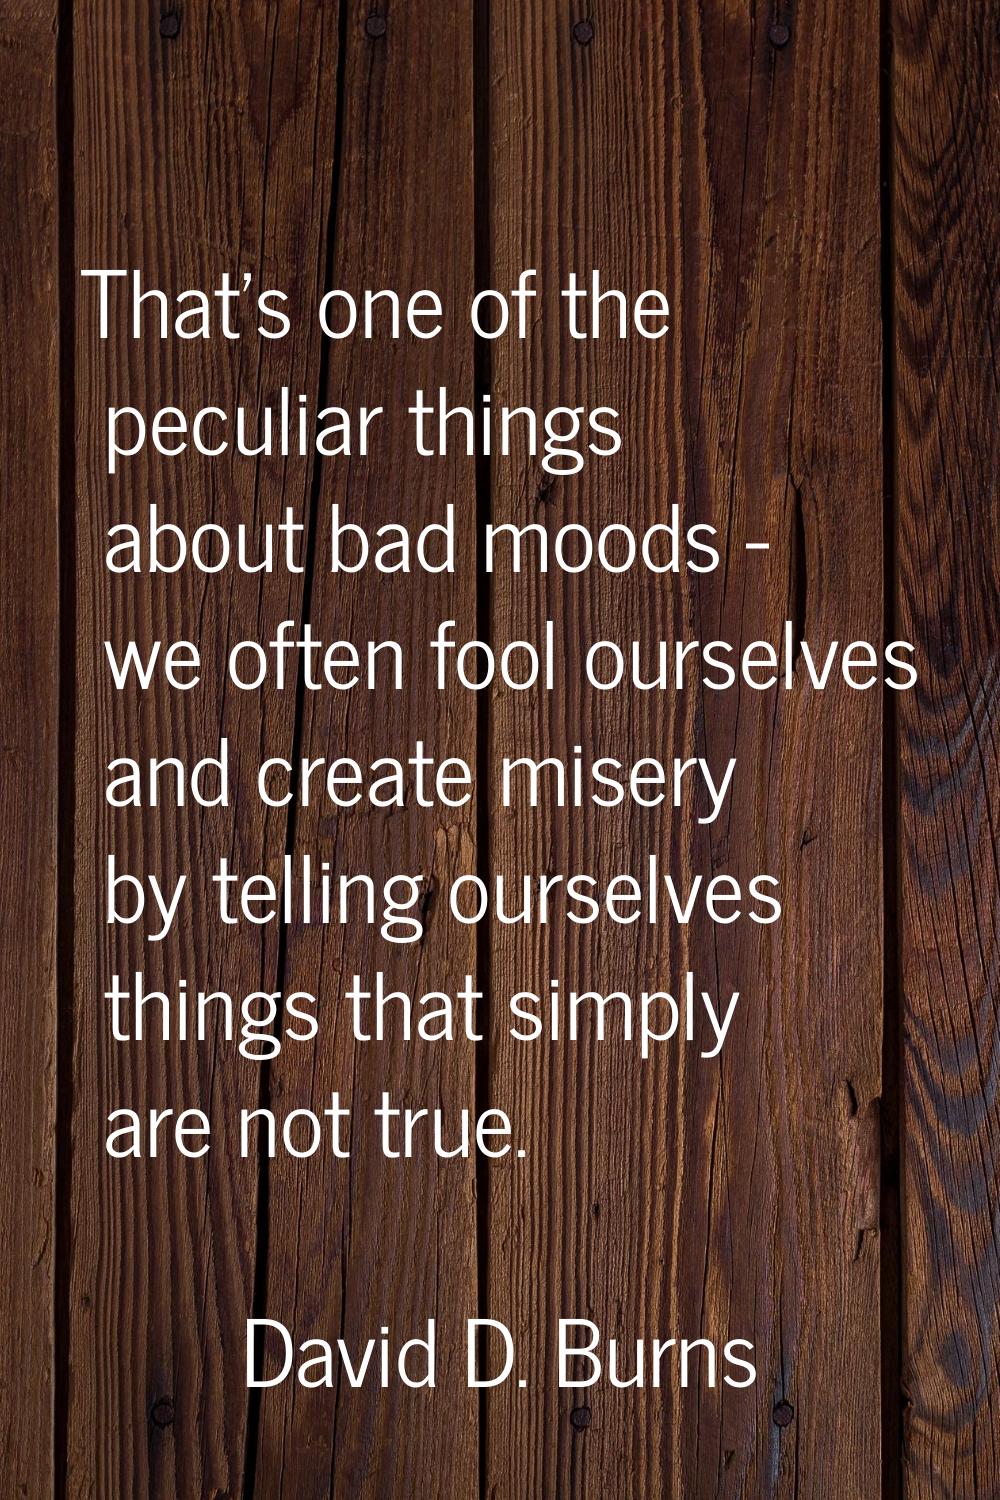 That's one of the peculiar things about bad moods - we often fool ourselves and create misery by te